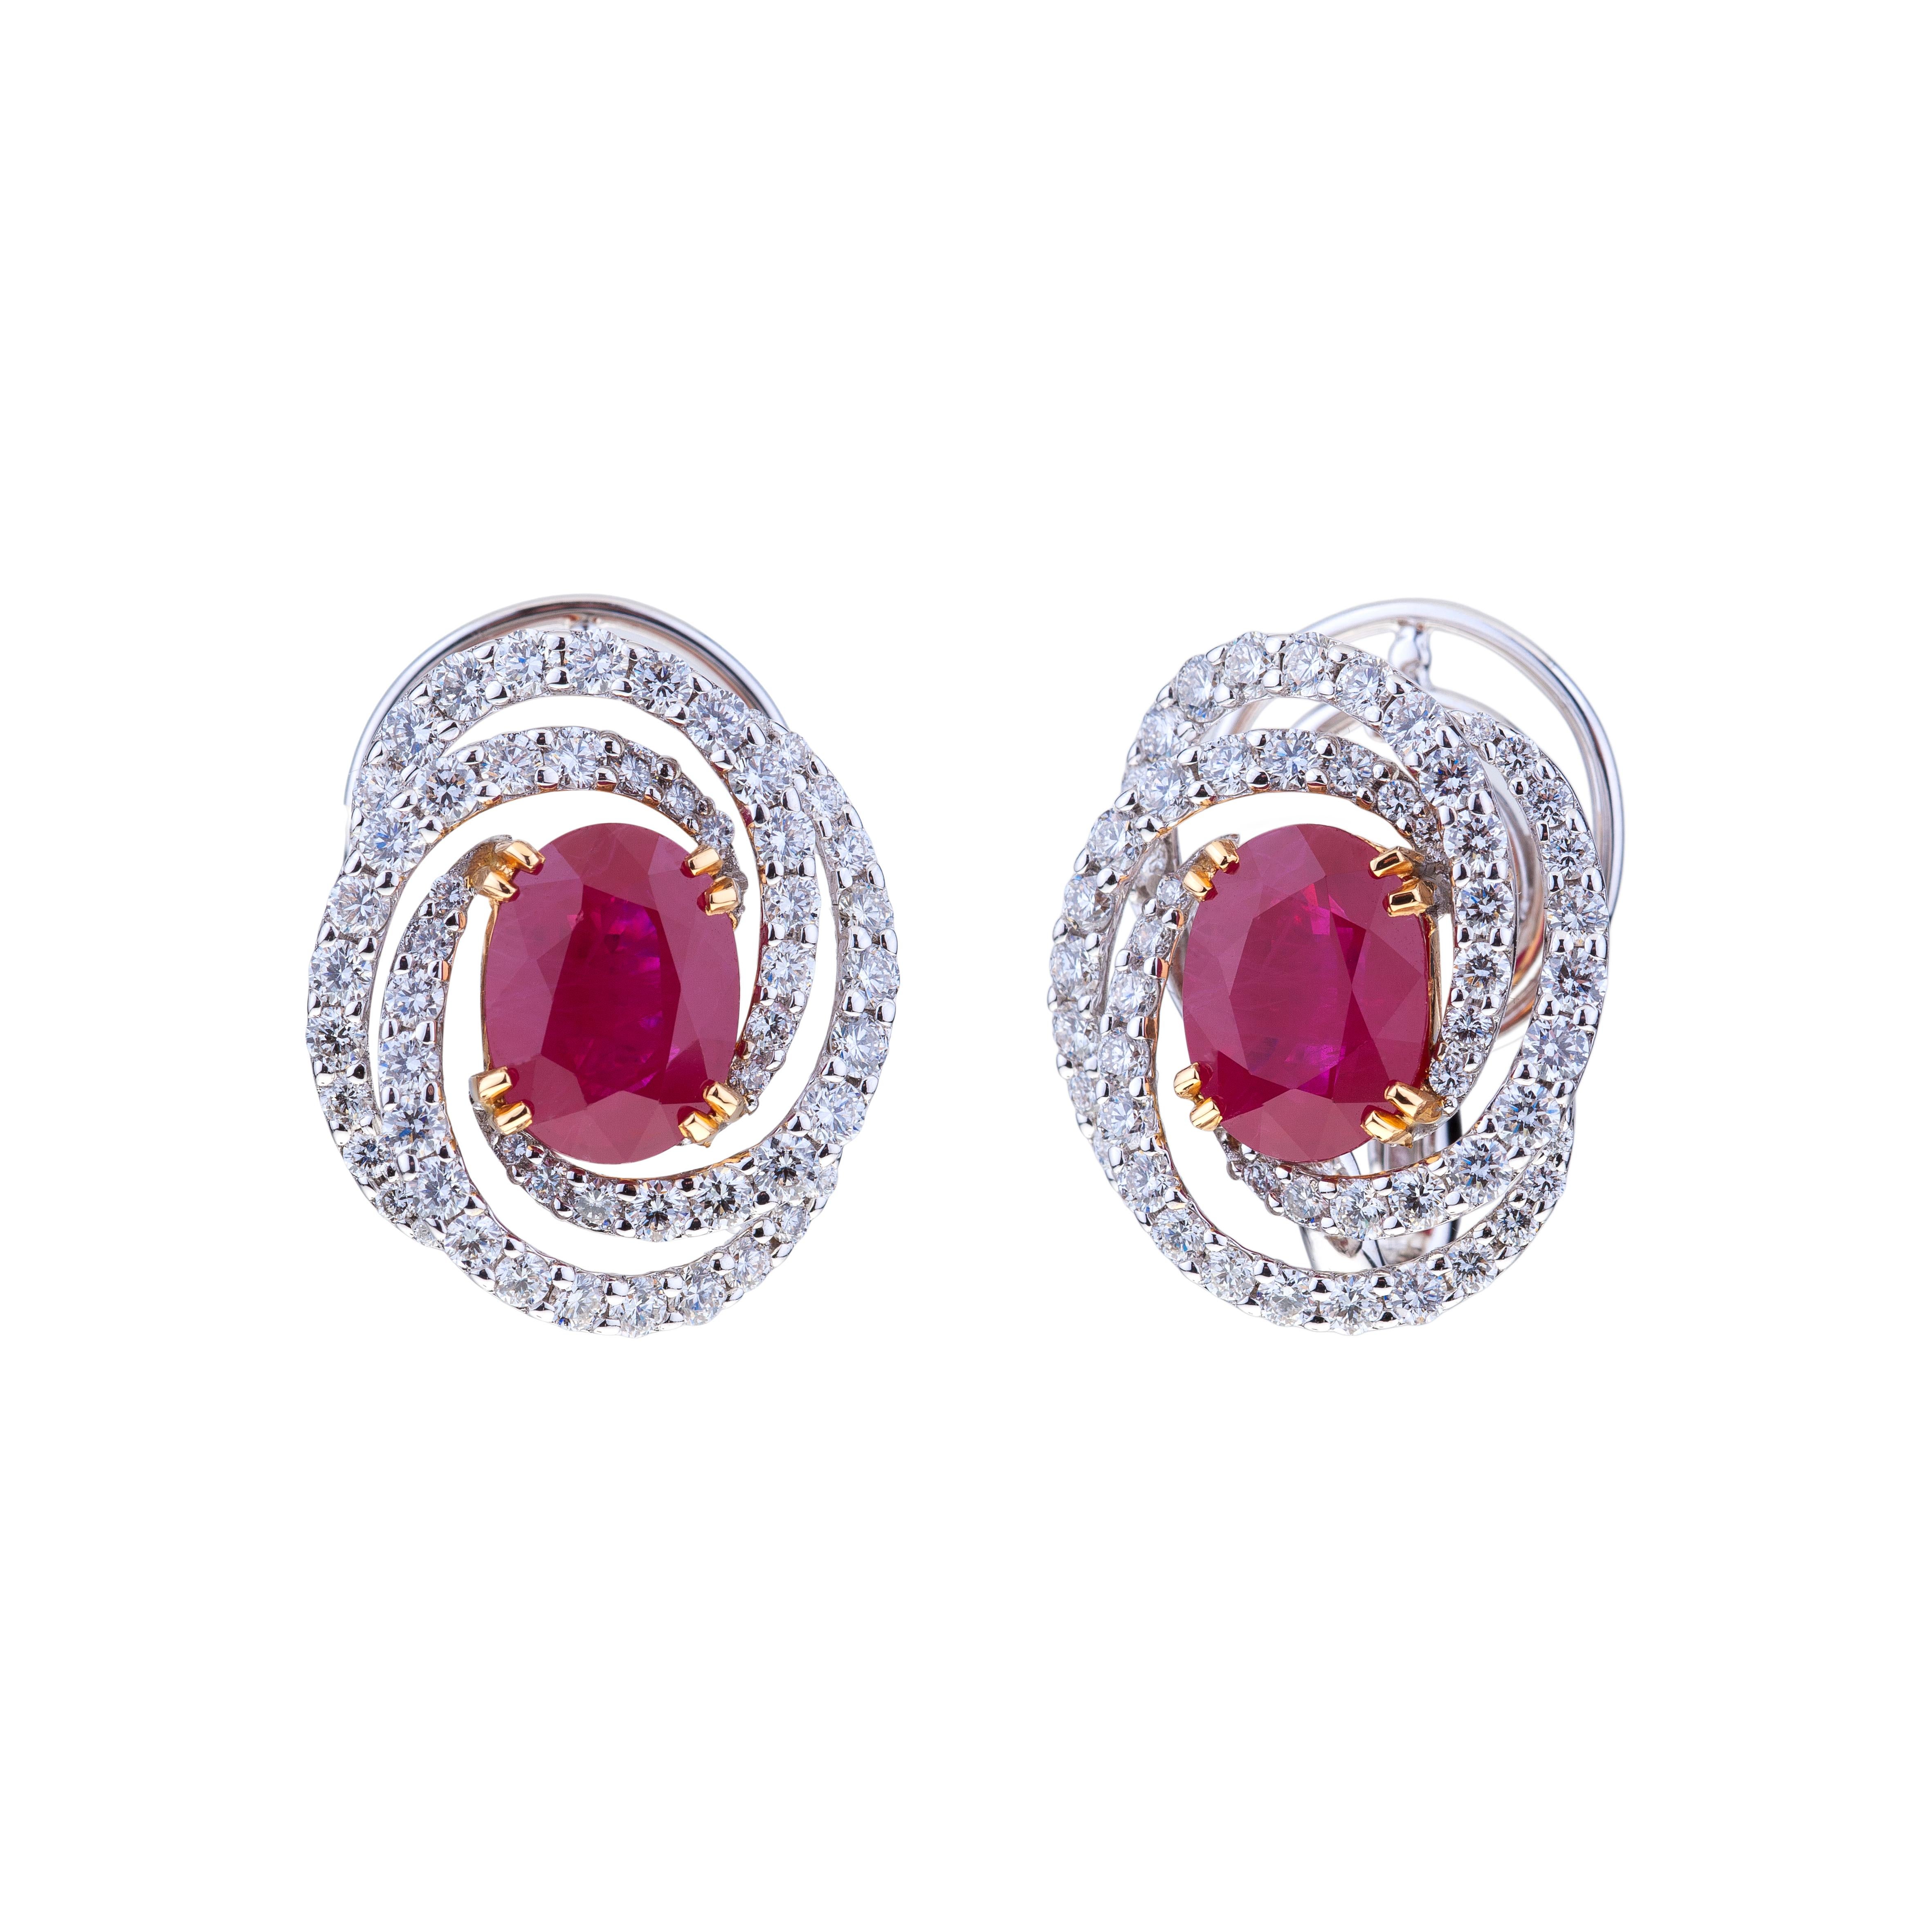 Ruby 3 Ct. Each Earrings White Gold with Circle of Diamonds with Certificate